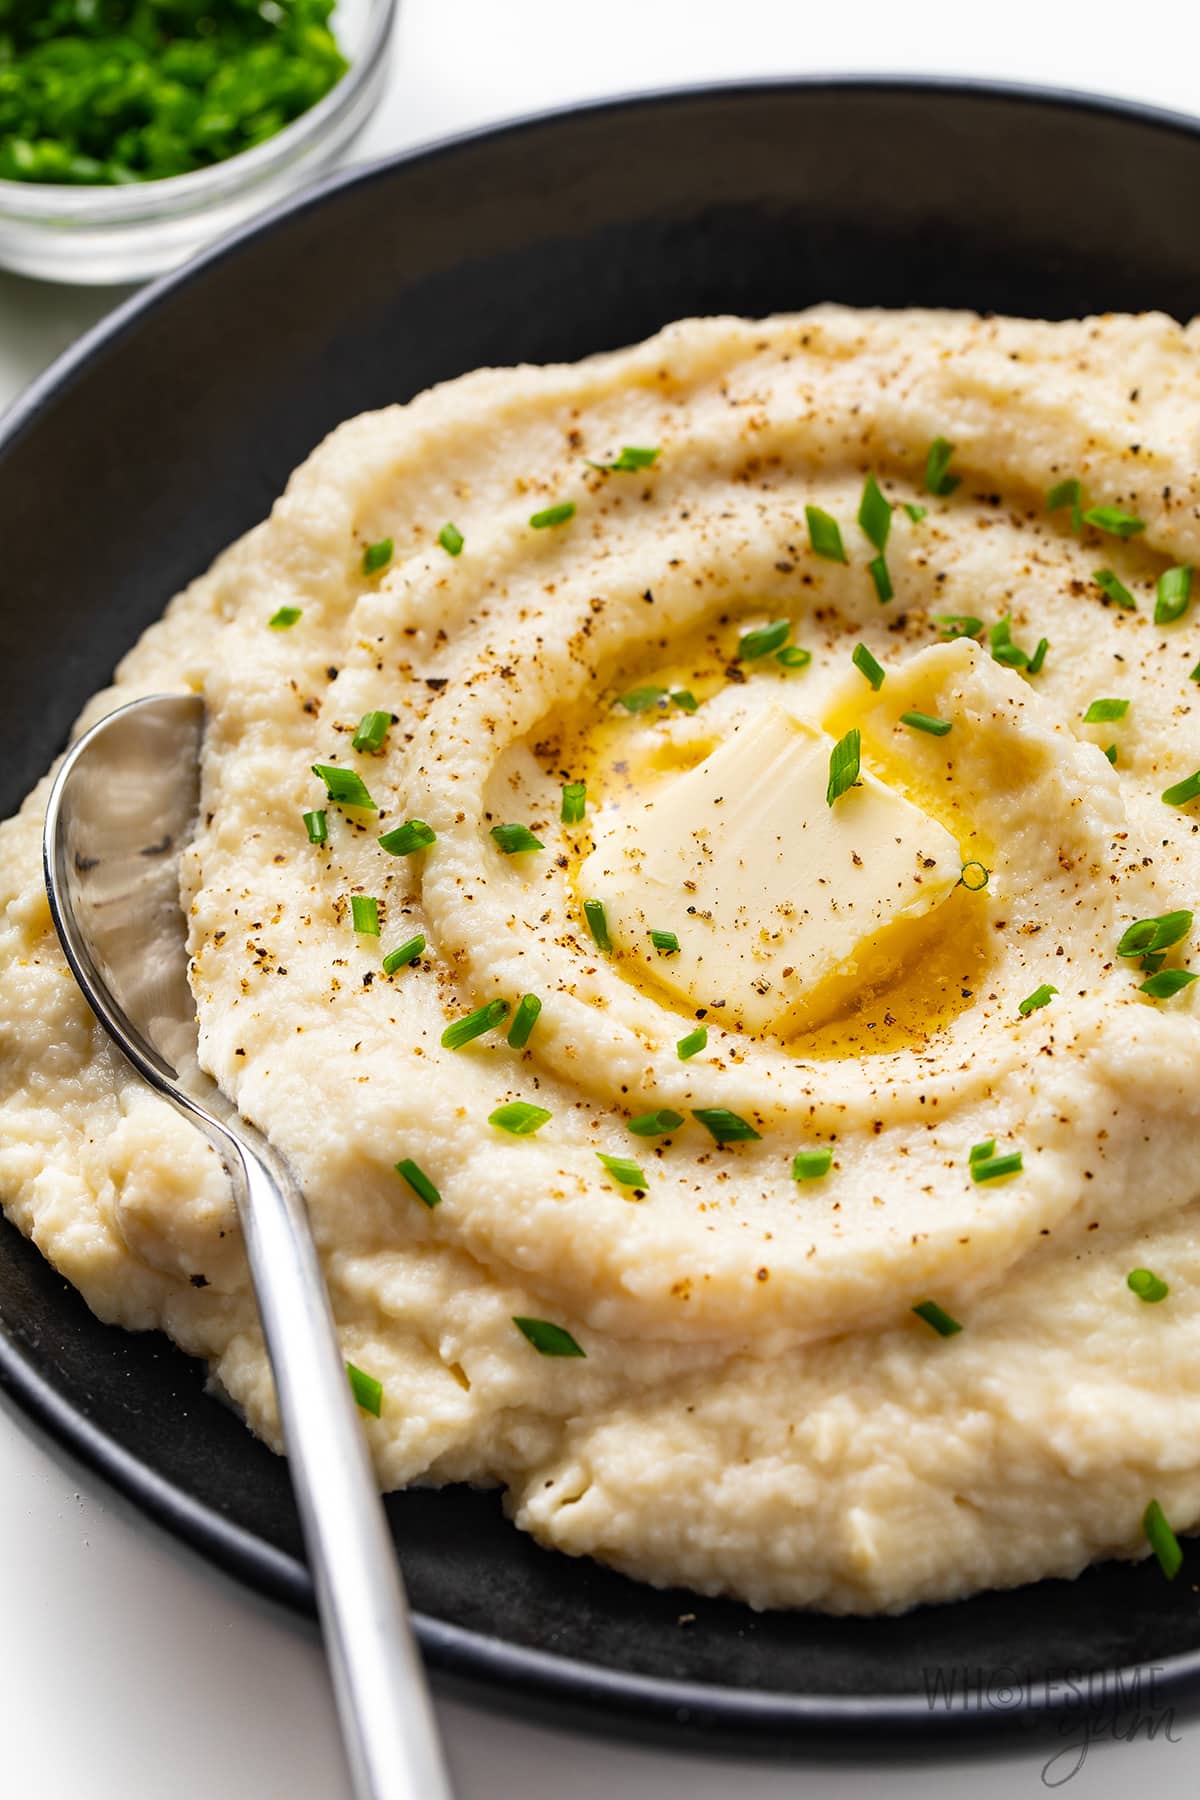 Cauliflower mashed potatoes in a bowl with butter, chives, and a spoon.